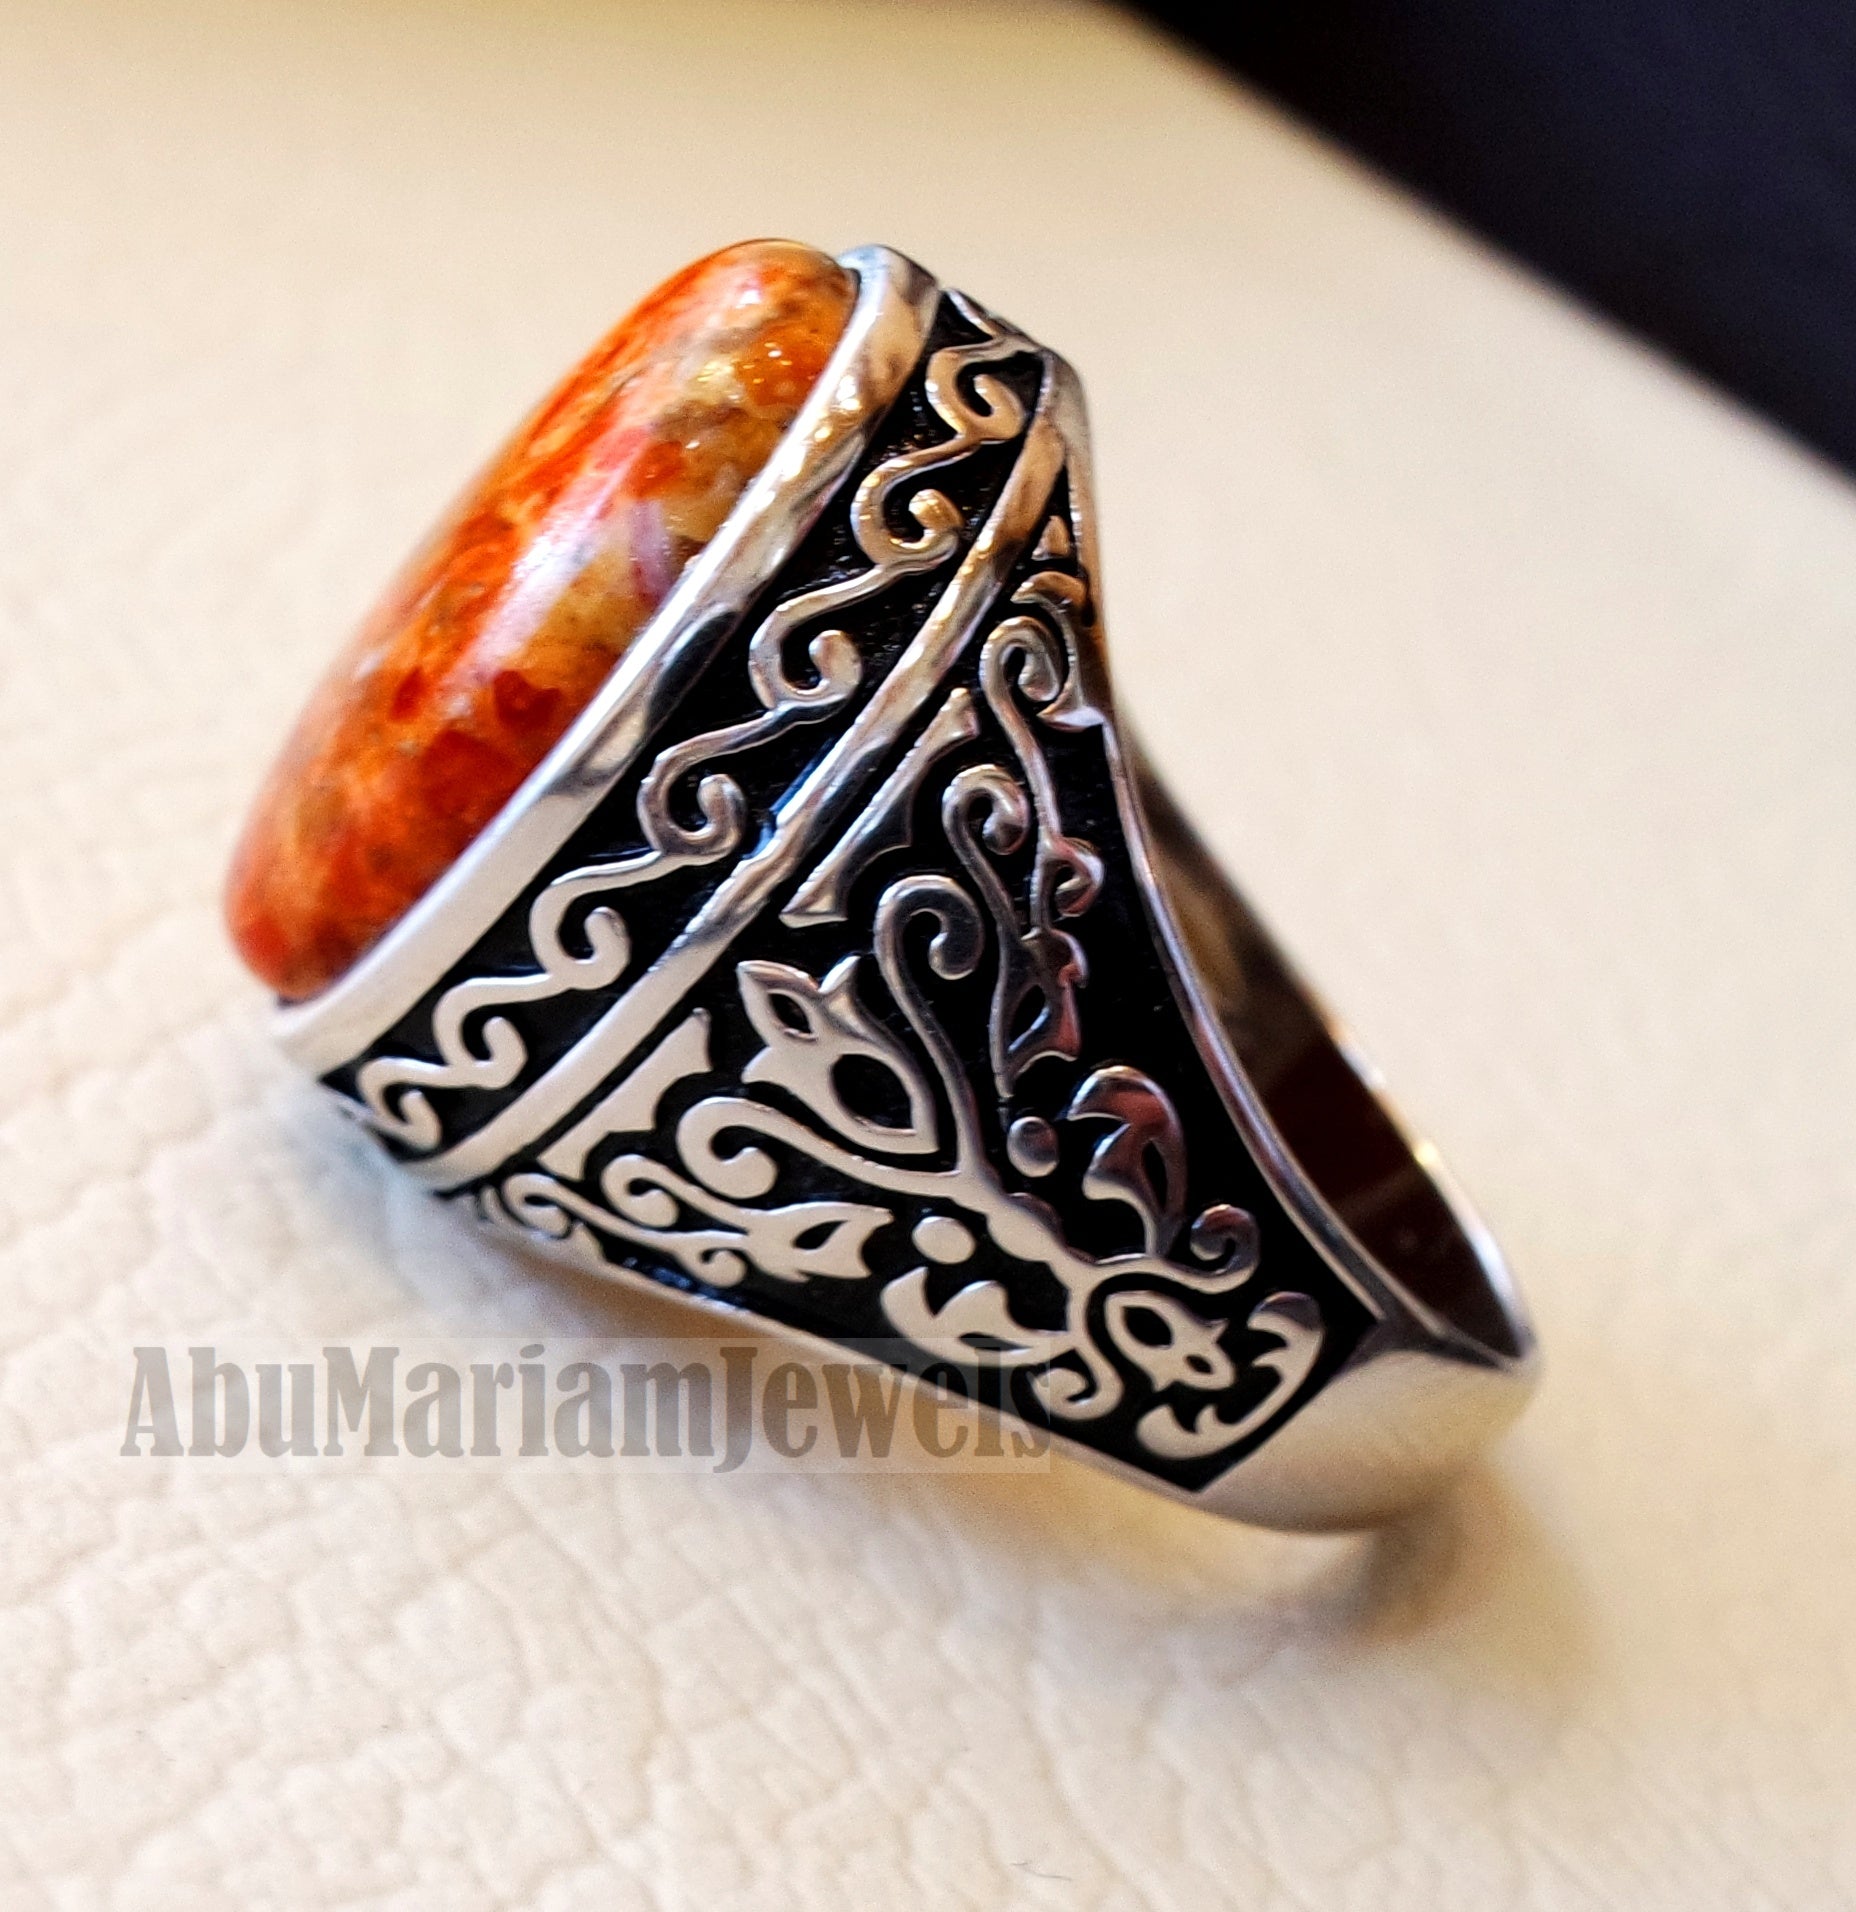 Sponge coral Murjan men ring orange brown red natural stone sterling silver 925 vintage turkish style all sizes fast shipping مرجان